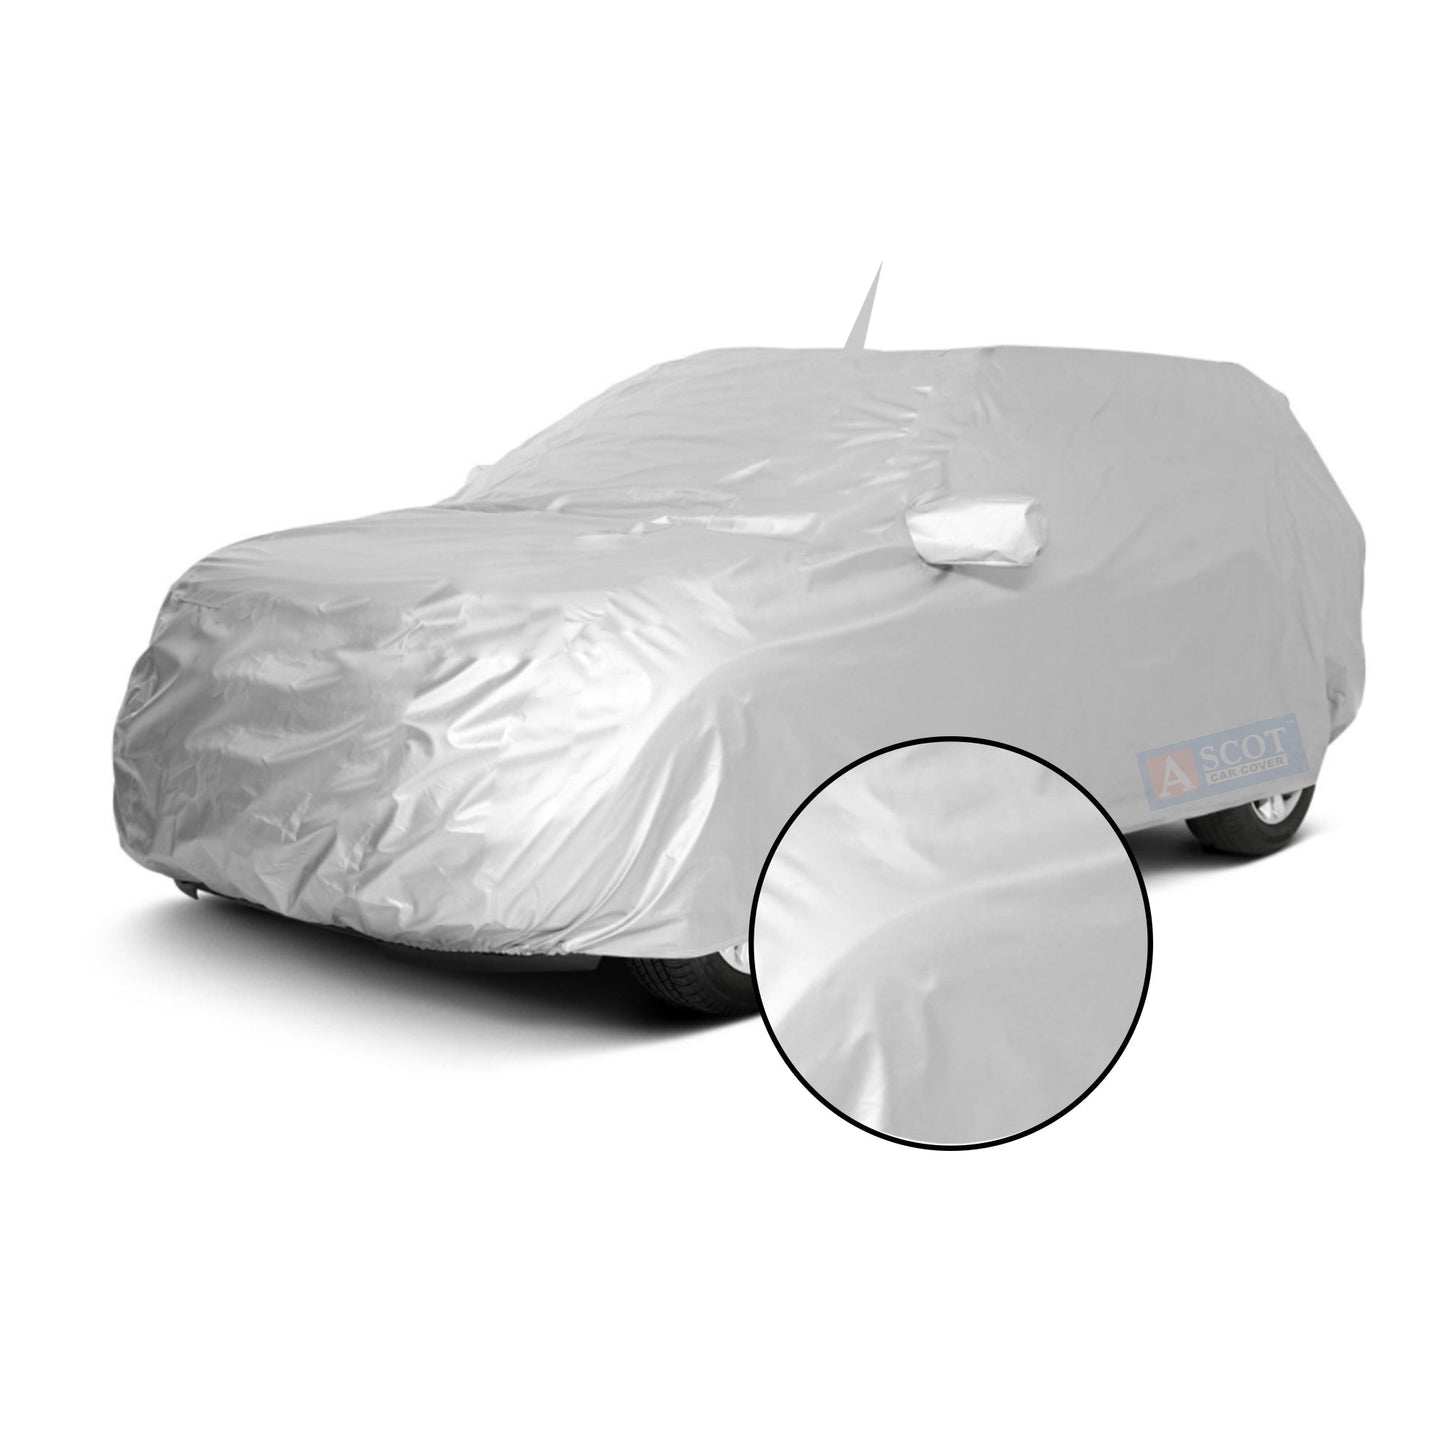 Ascot BMW 7 Series 2015-2024 Model Car Body Cover Dust Proof, Trippel Stitched